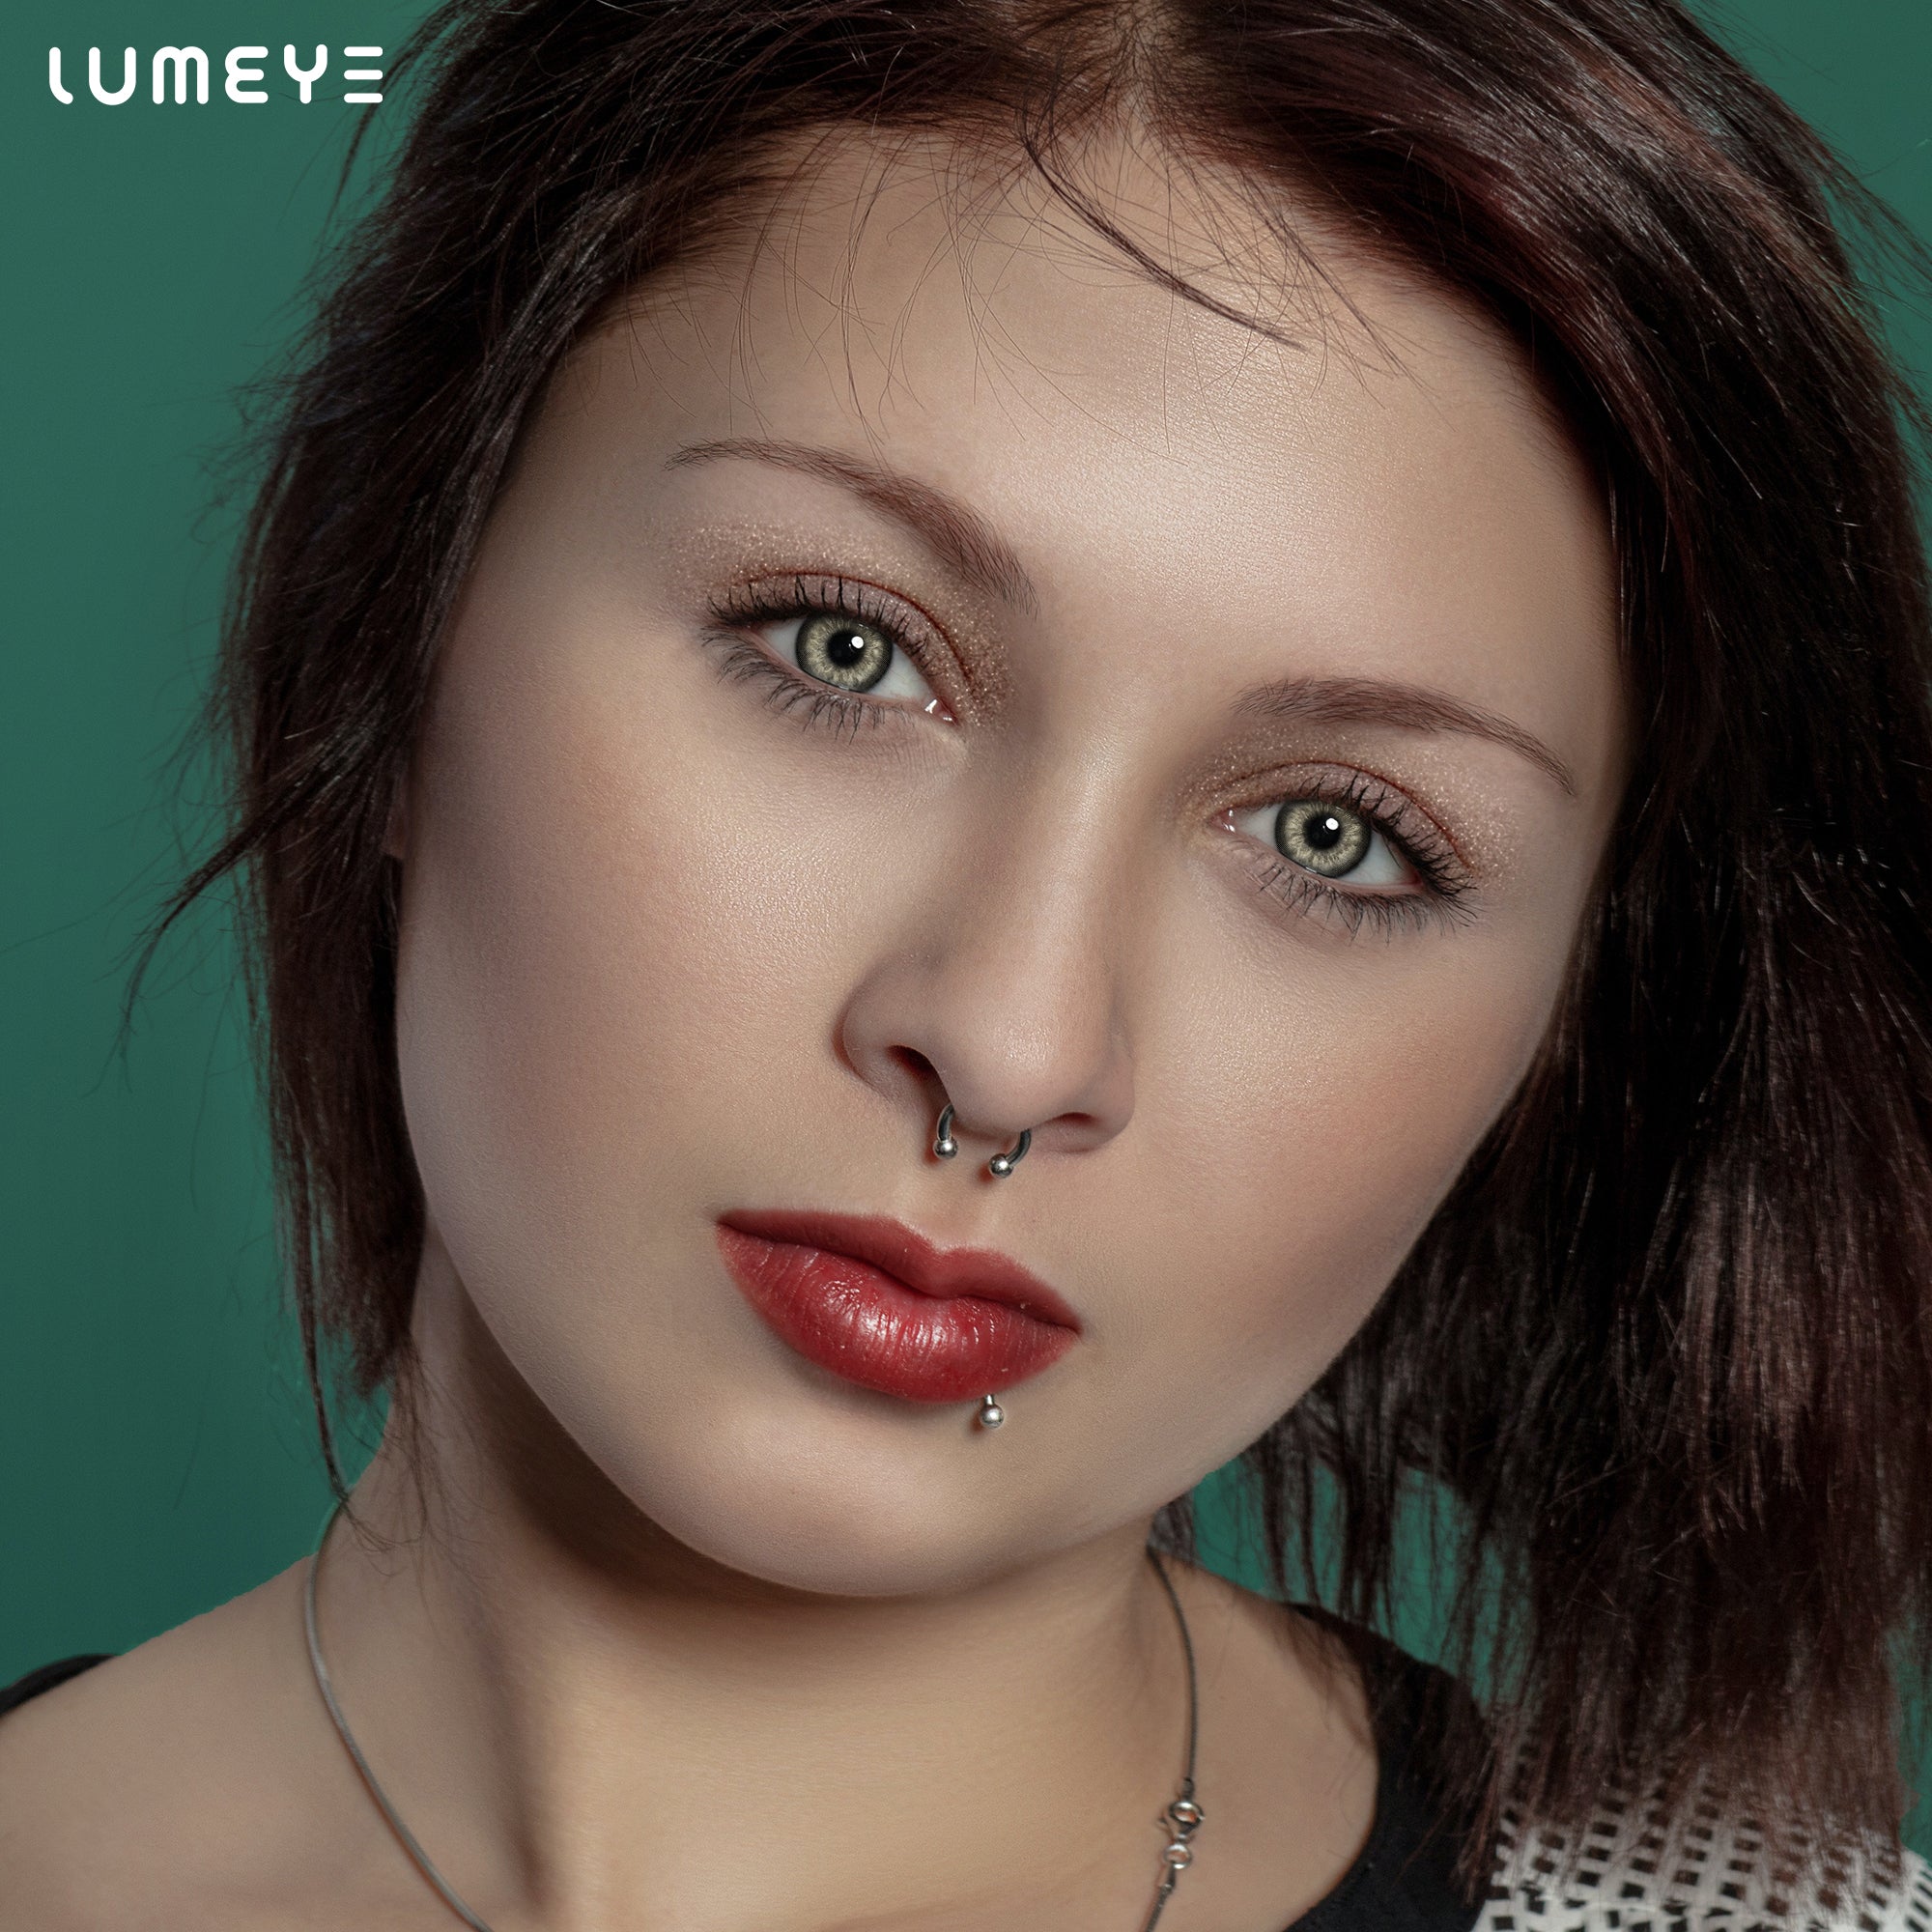 Best COLORED CONTACTS - LUMEYE Forest Brown Colored Contact Lenses - LUMEYE